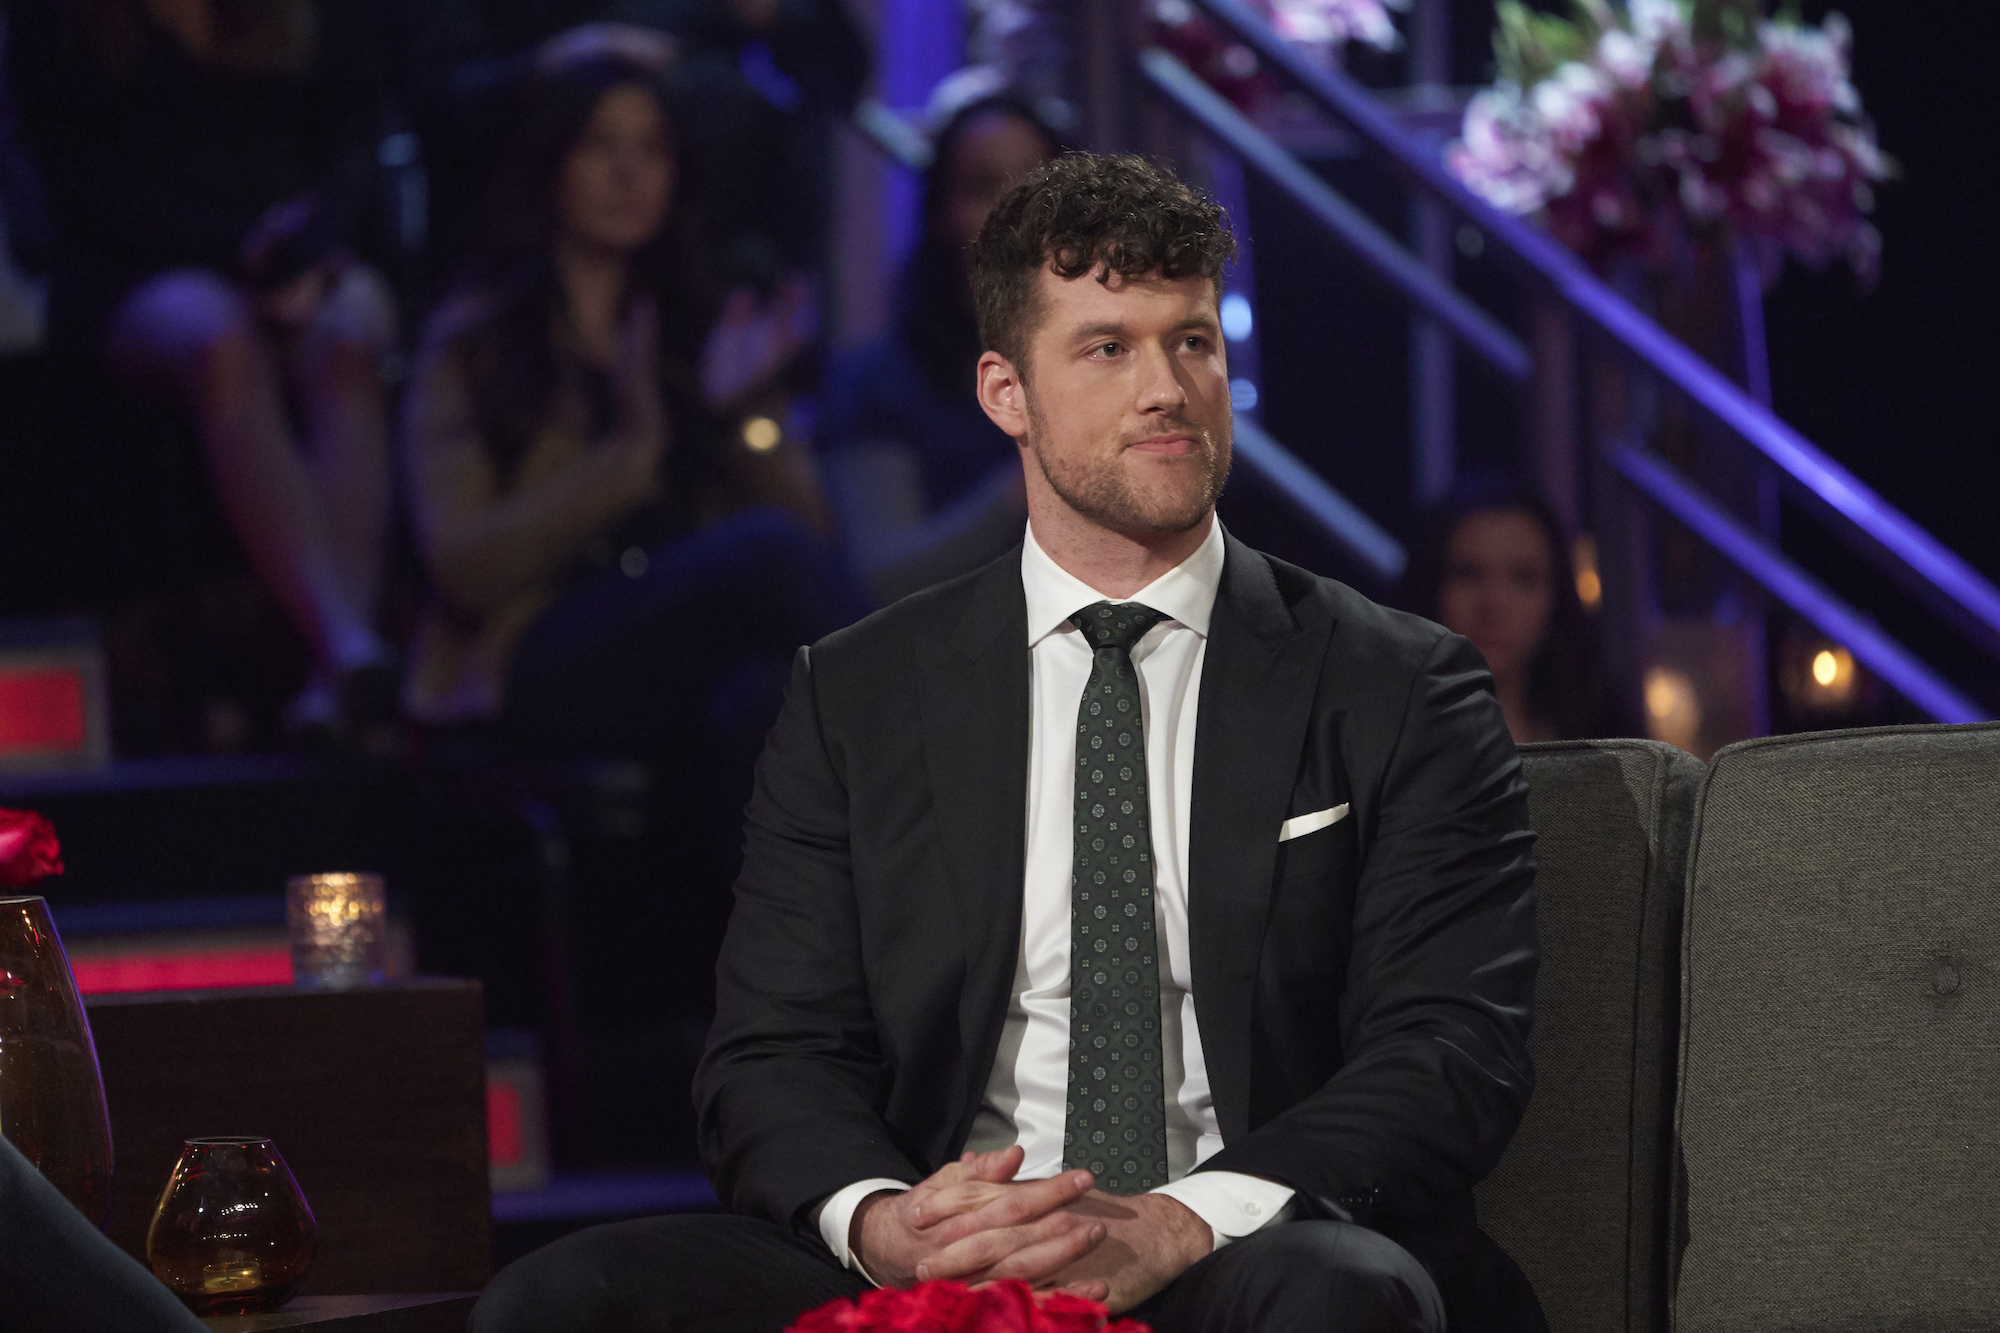 'The Bachelor' star Clayton Echard wearing a suit at the 'Women Tell All.'